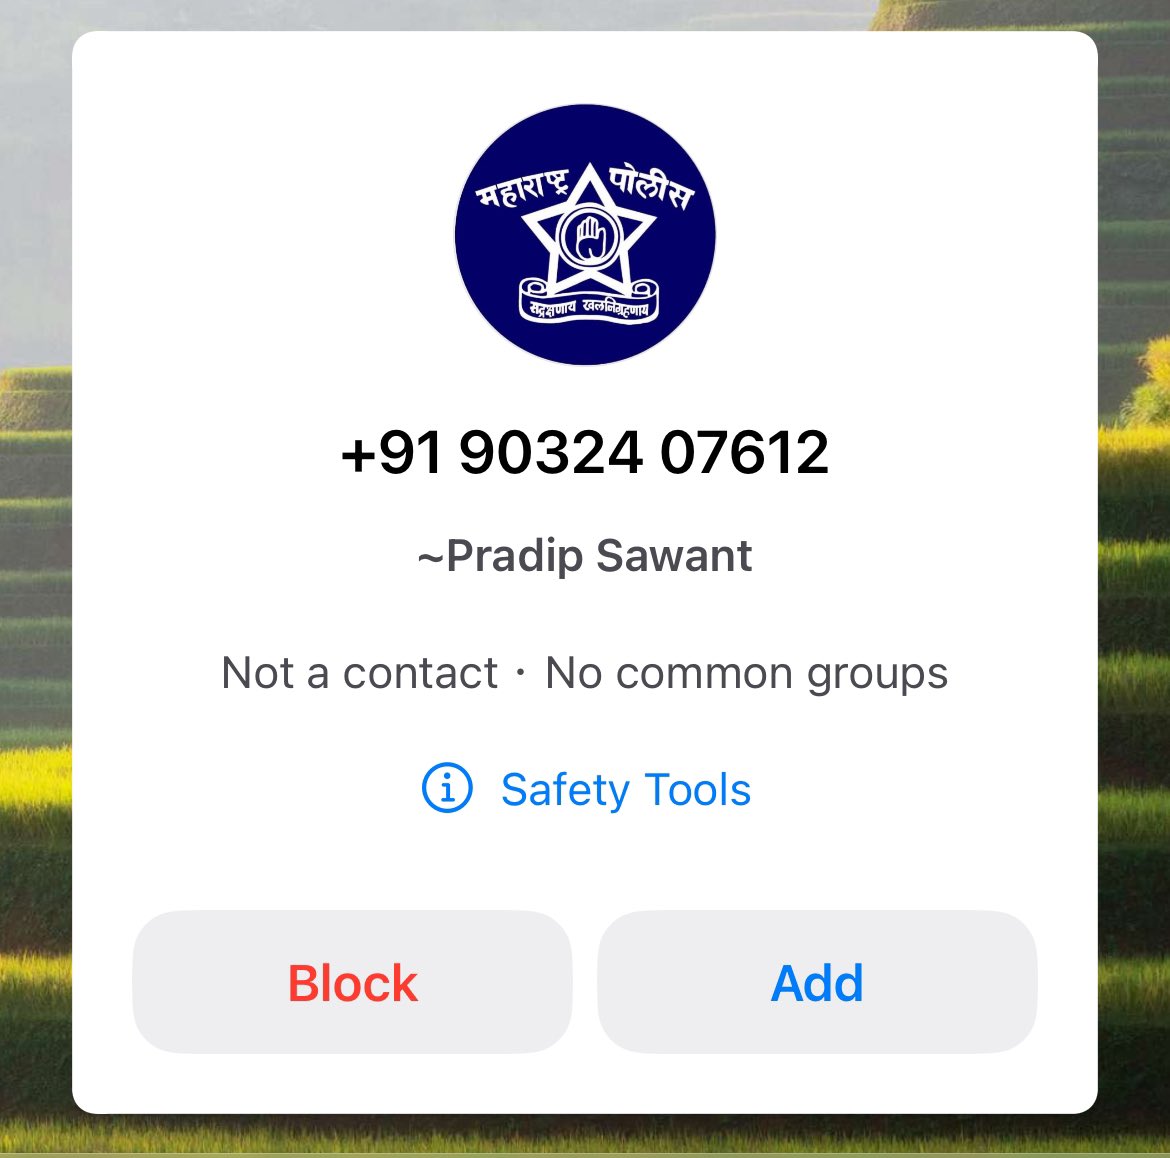 #FraudAlert: Today morning I received a call from better sophisticated scammers. The entire call lasted about 1 hour and I was quite convinced that it was genuine. The scammers initially called me through an automated voice call (+91 8112-178017) saying it’s from @TRAI. The…